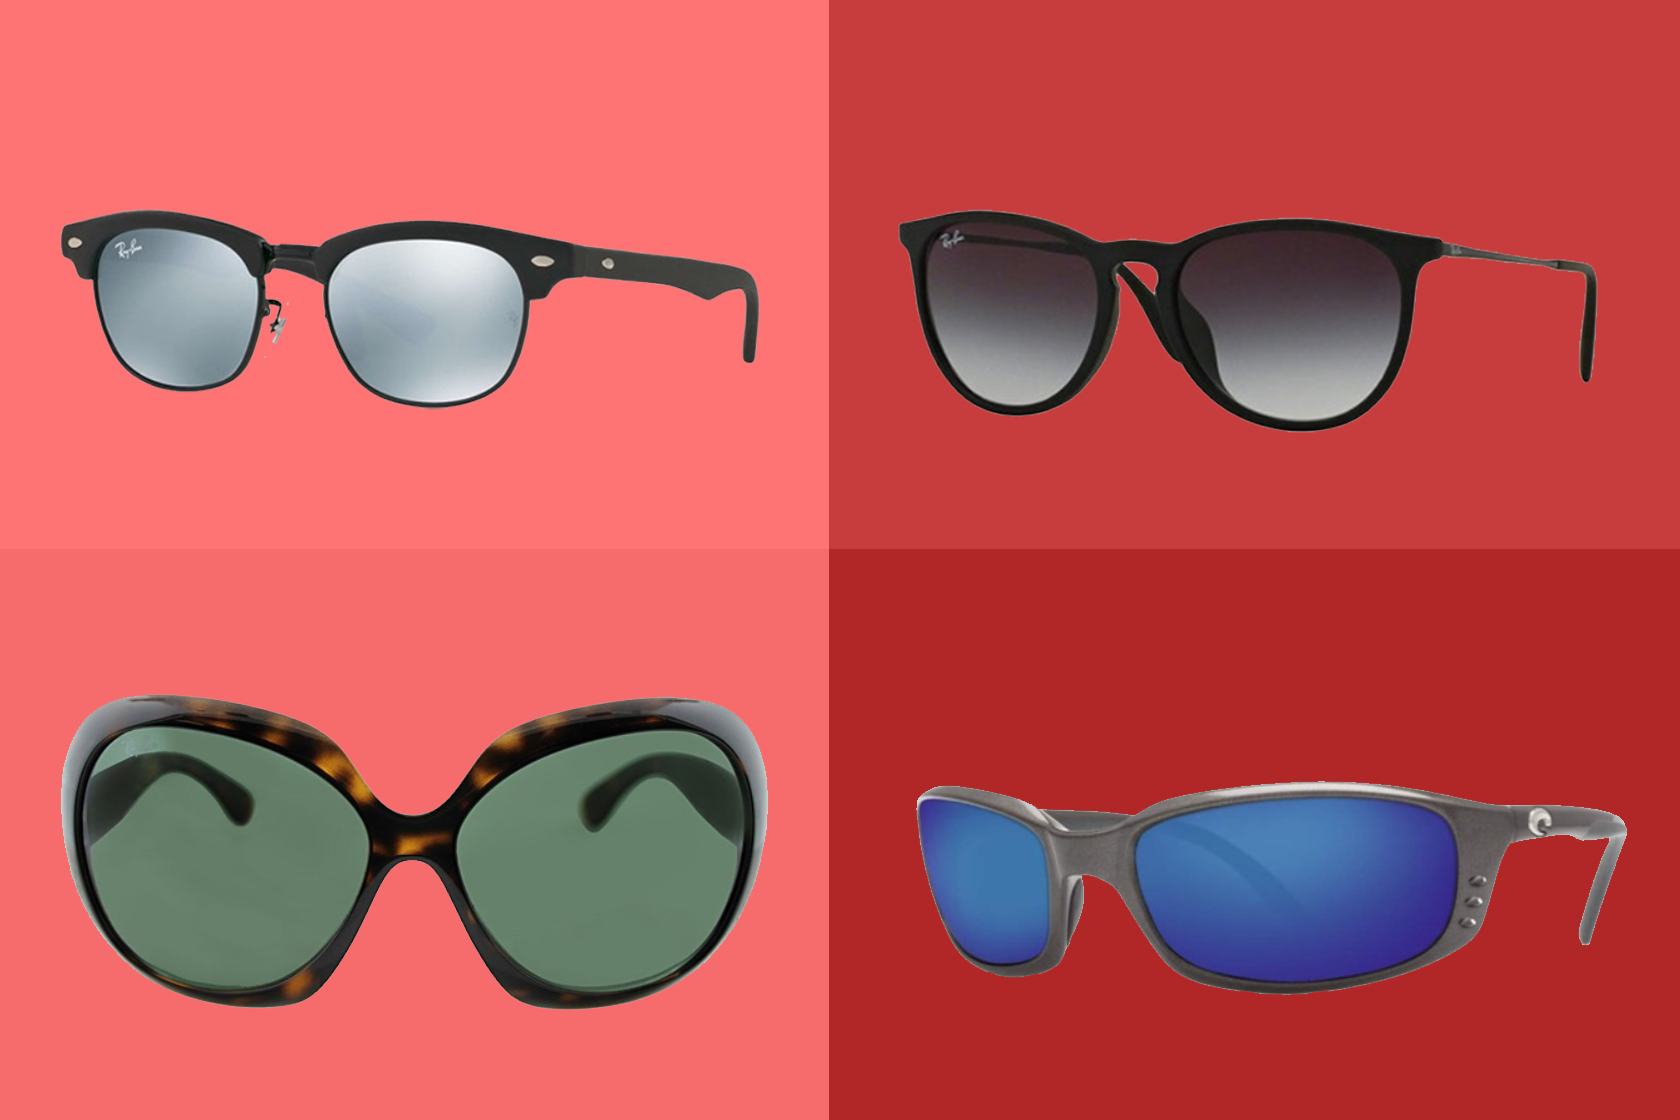 Ray-Ban, Oakley, and Costa sunnies are dirt cheap on Woot! right now